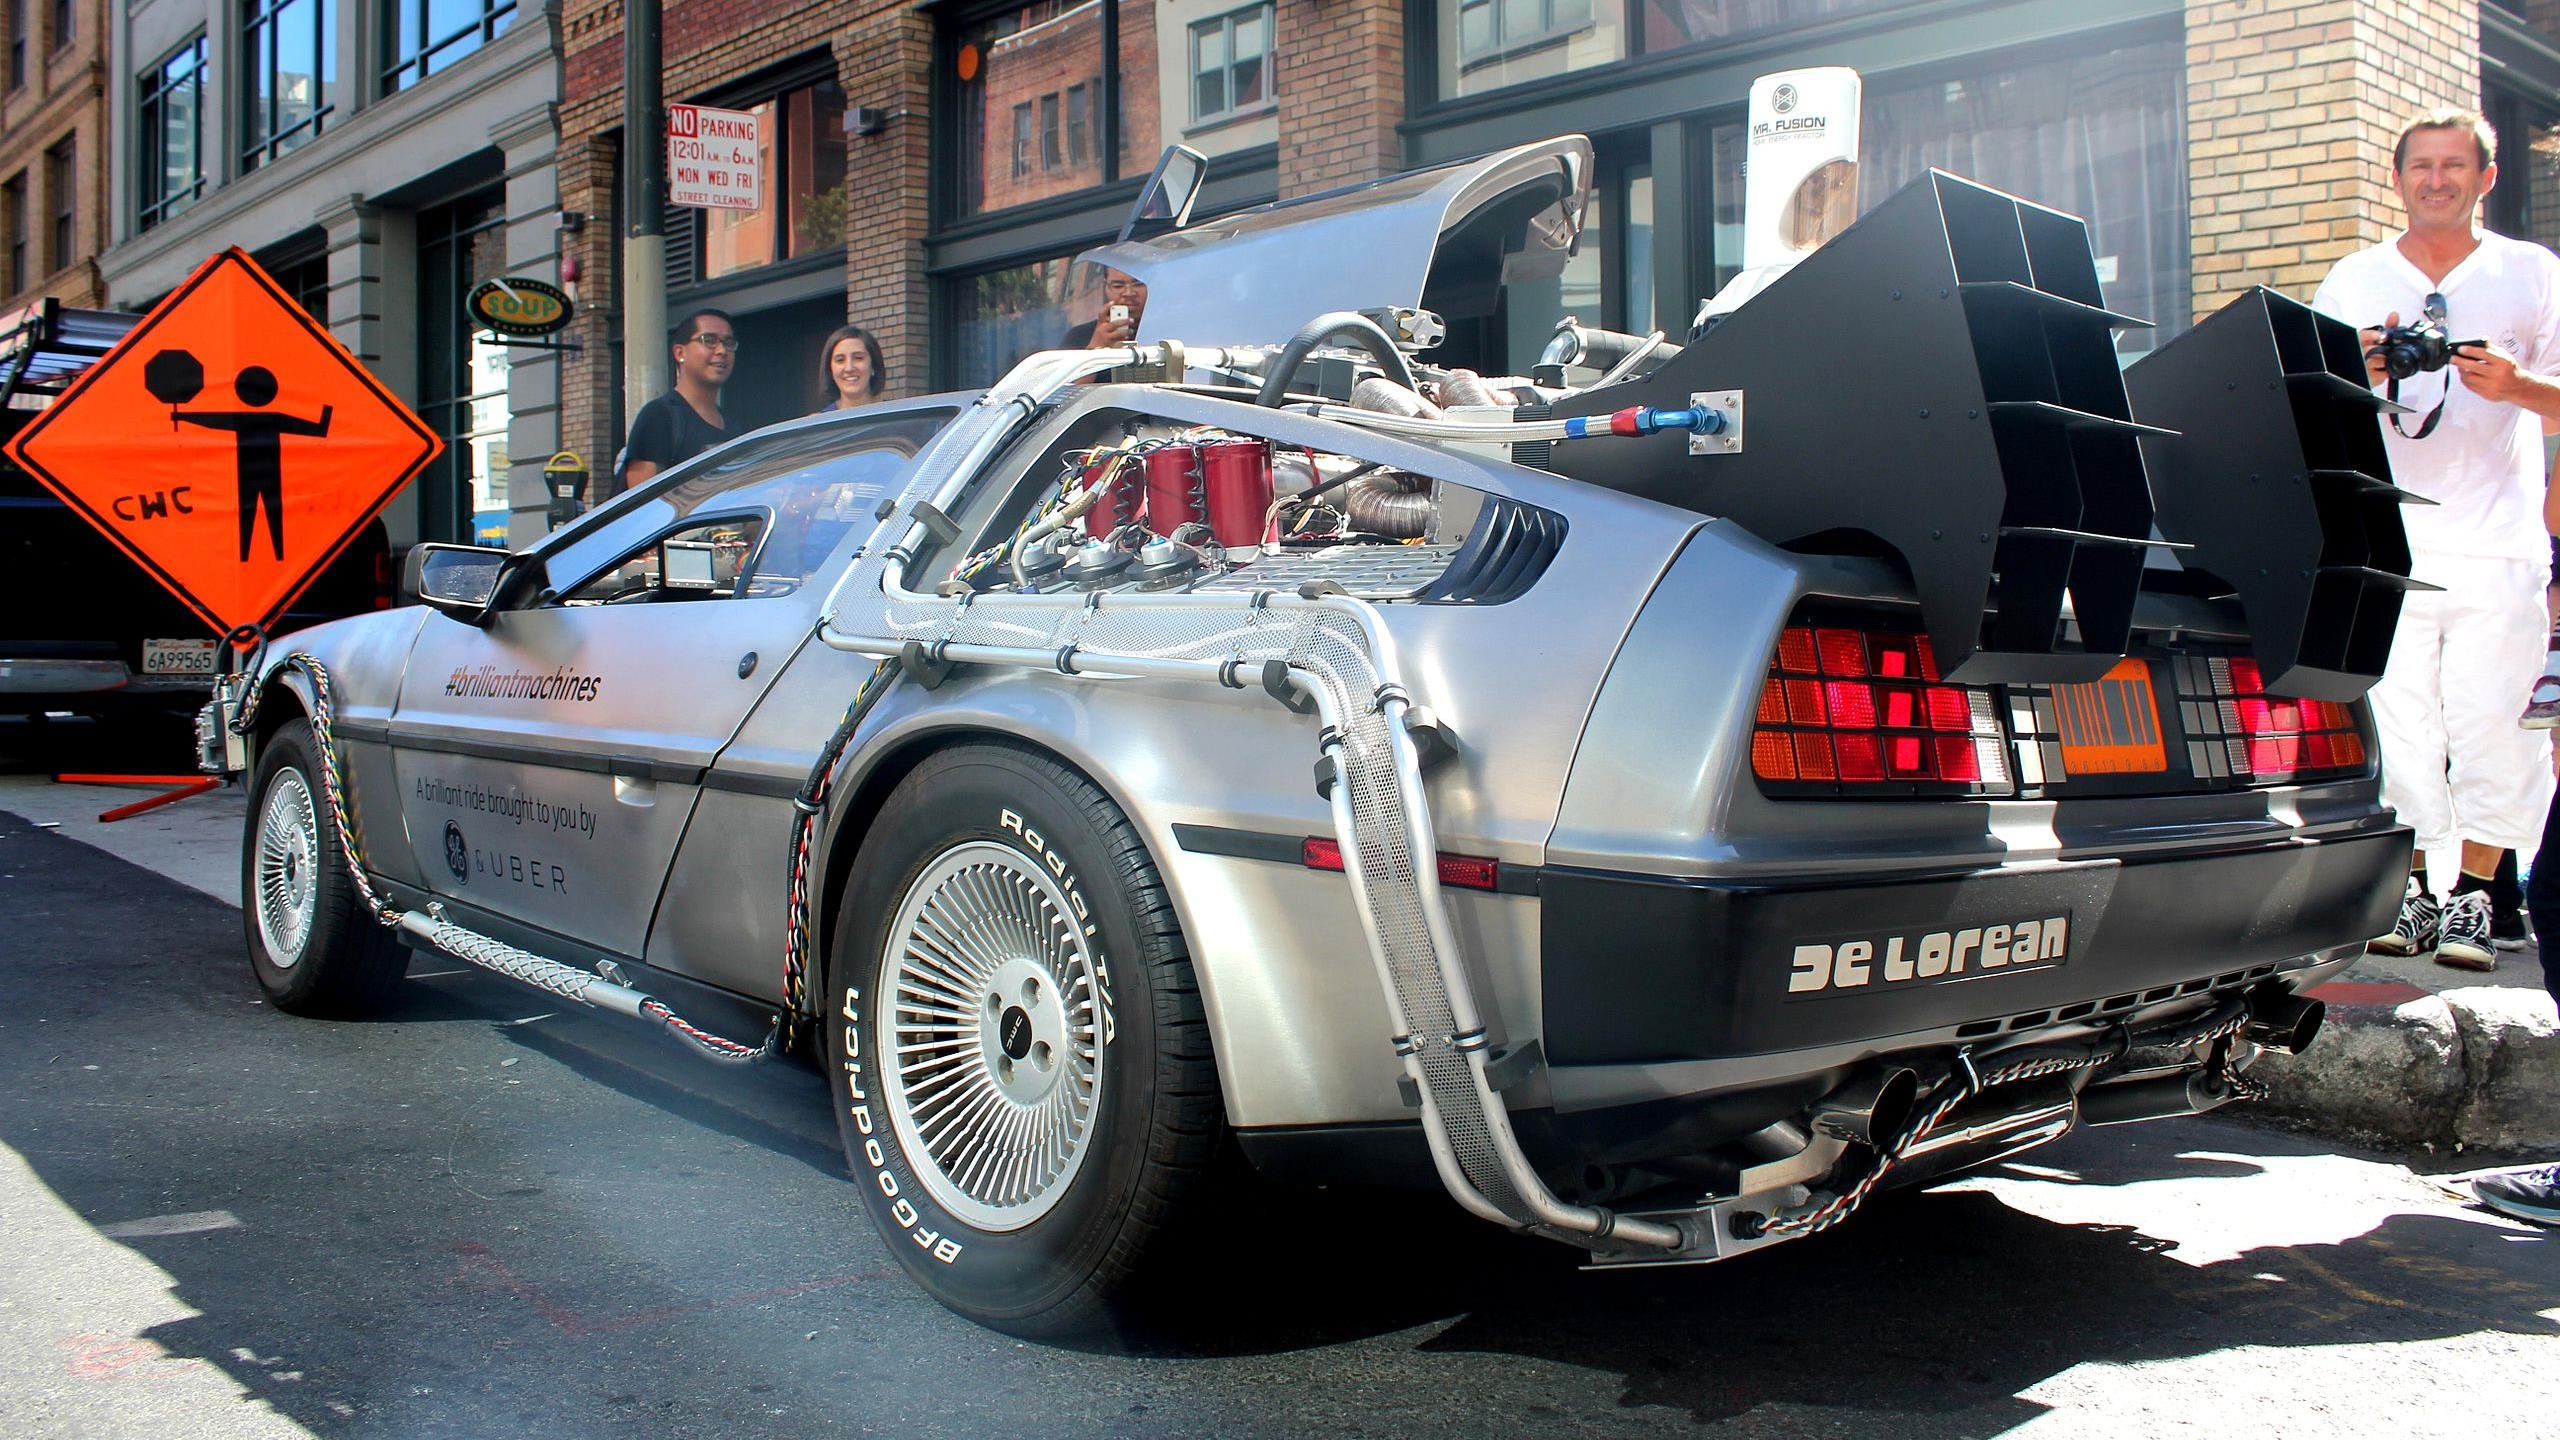 A silver DeLorean car, modified to resemble the time machine from "Back to the Future," is parked on a street. People are standing nearby, marveling at the iconic vehicle, while an orange construction sign looms in the background, hinting at disruptions in travel time physics.